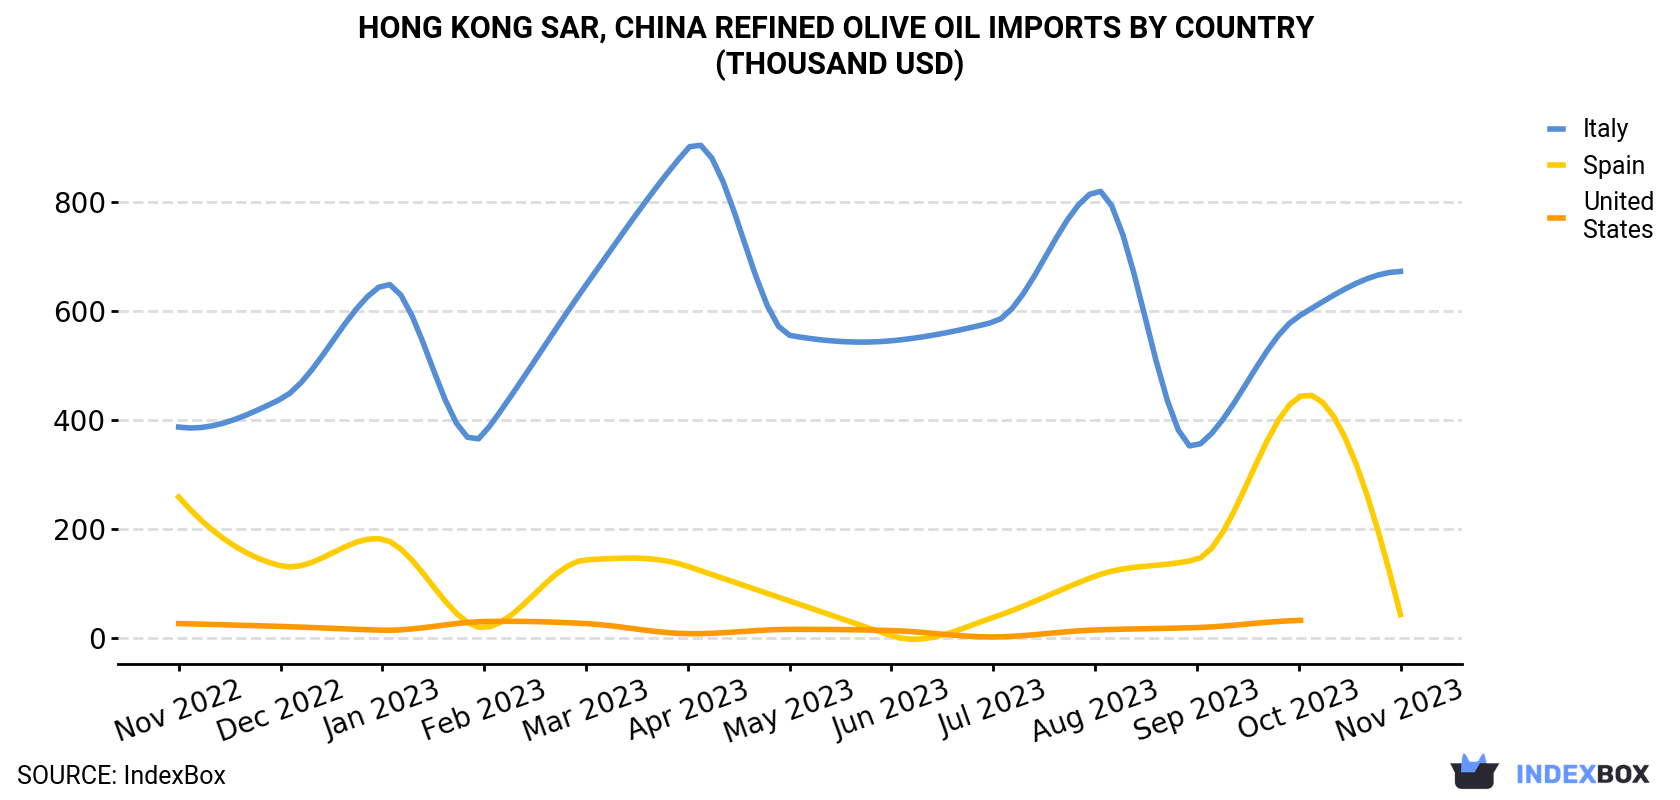 Hong Kong Refined Olive Oil Imports By Country (Thousand USD)